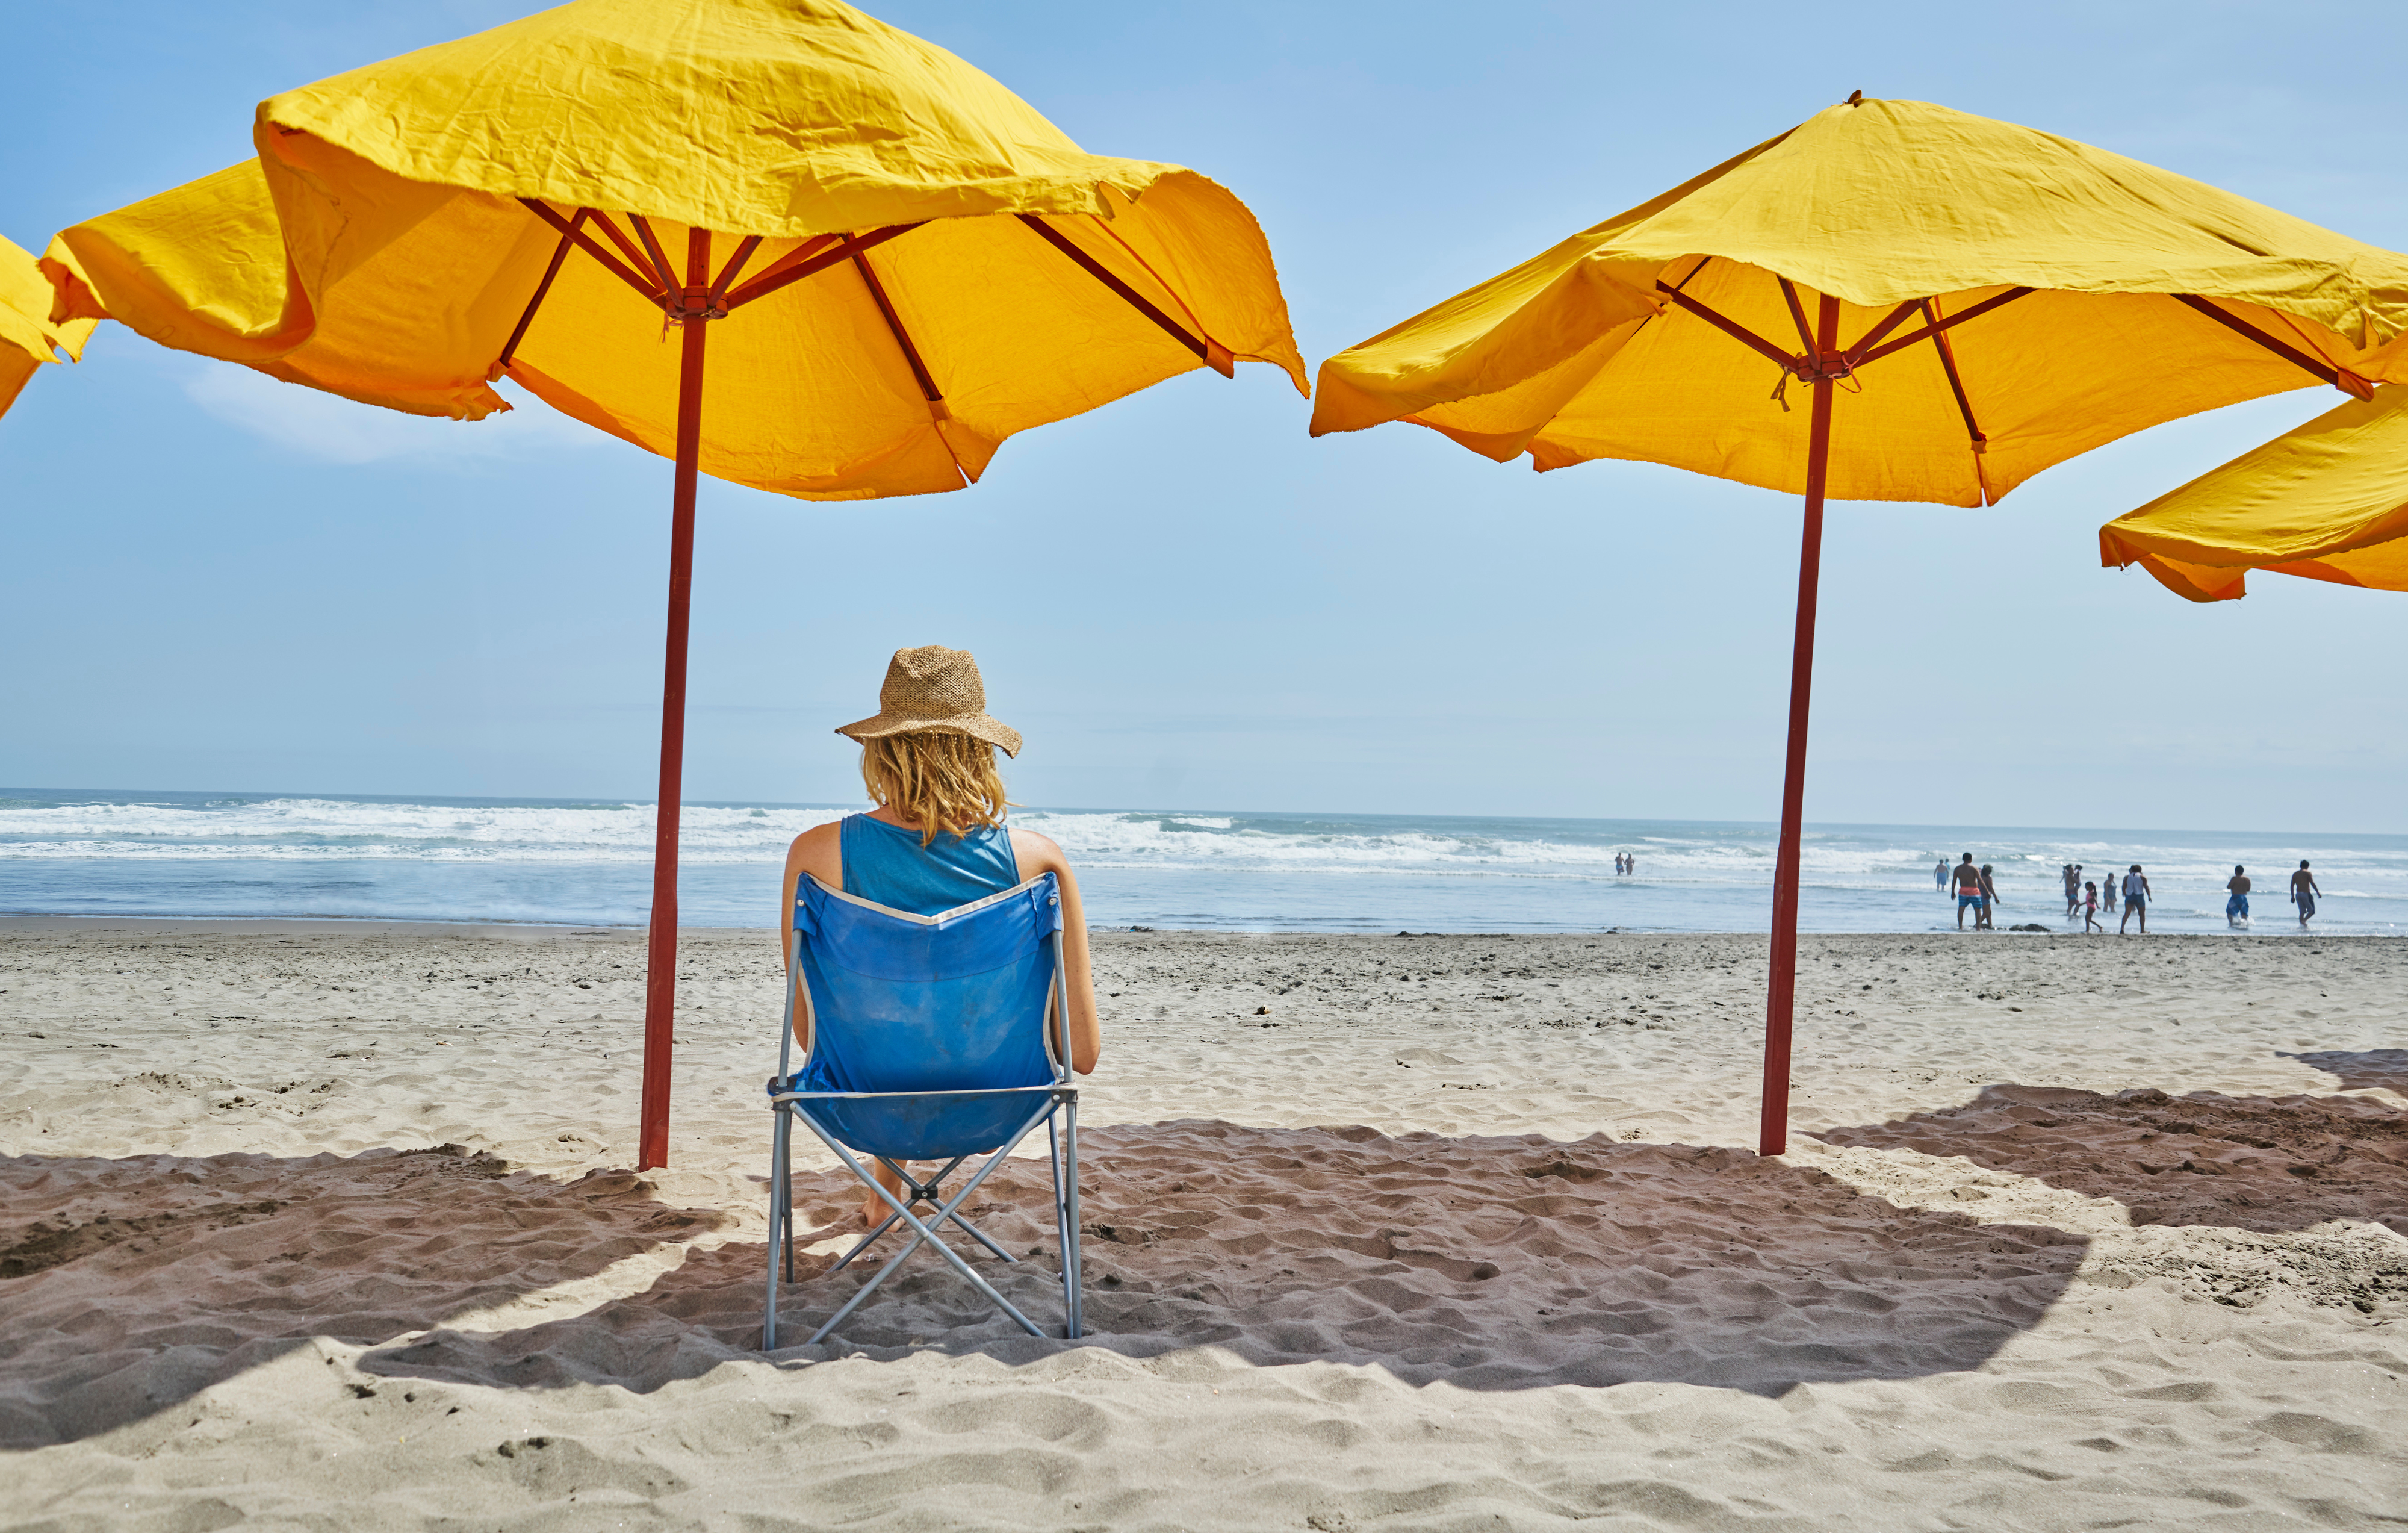 A person in a sun hat sits on a beach chair under yellow umbrellas facing the ocean. Several people can be seen walking along the shoreline in the distance